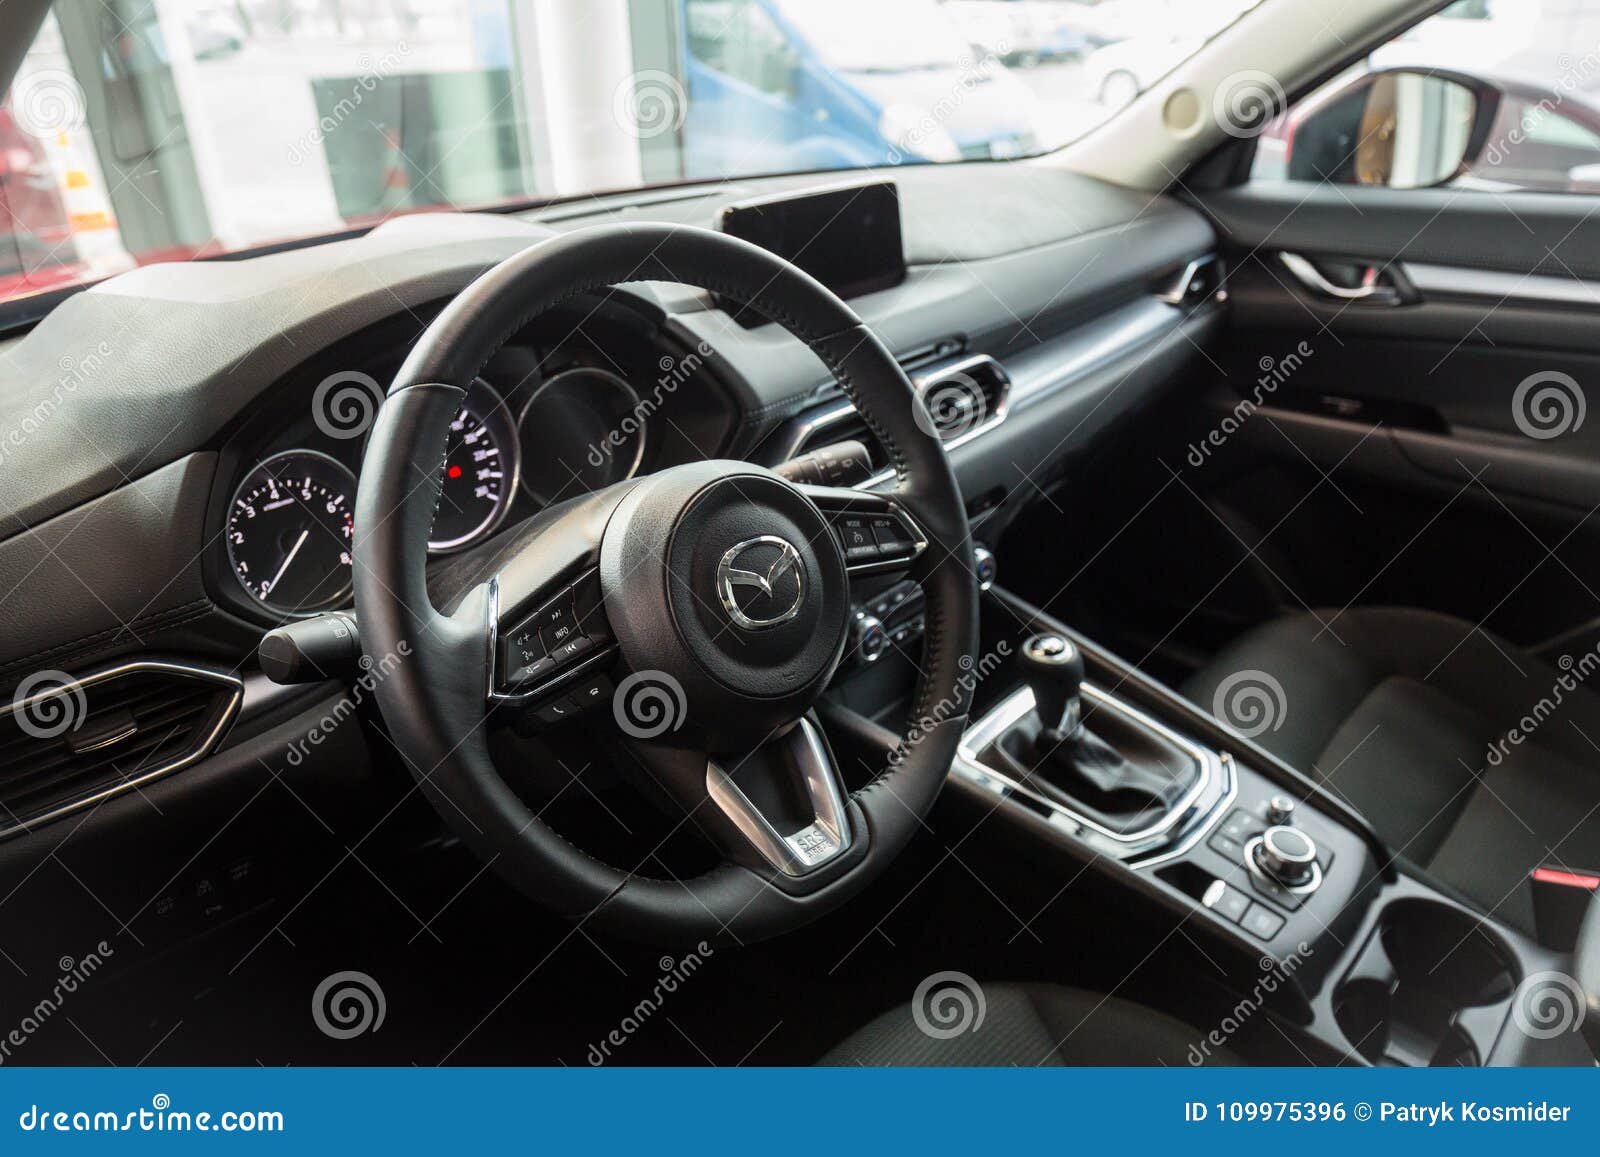 Interior Of Mazda Cx 5 Editorial Photo Image Of Industry